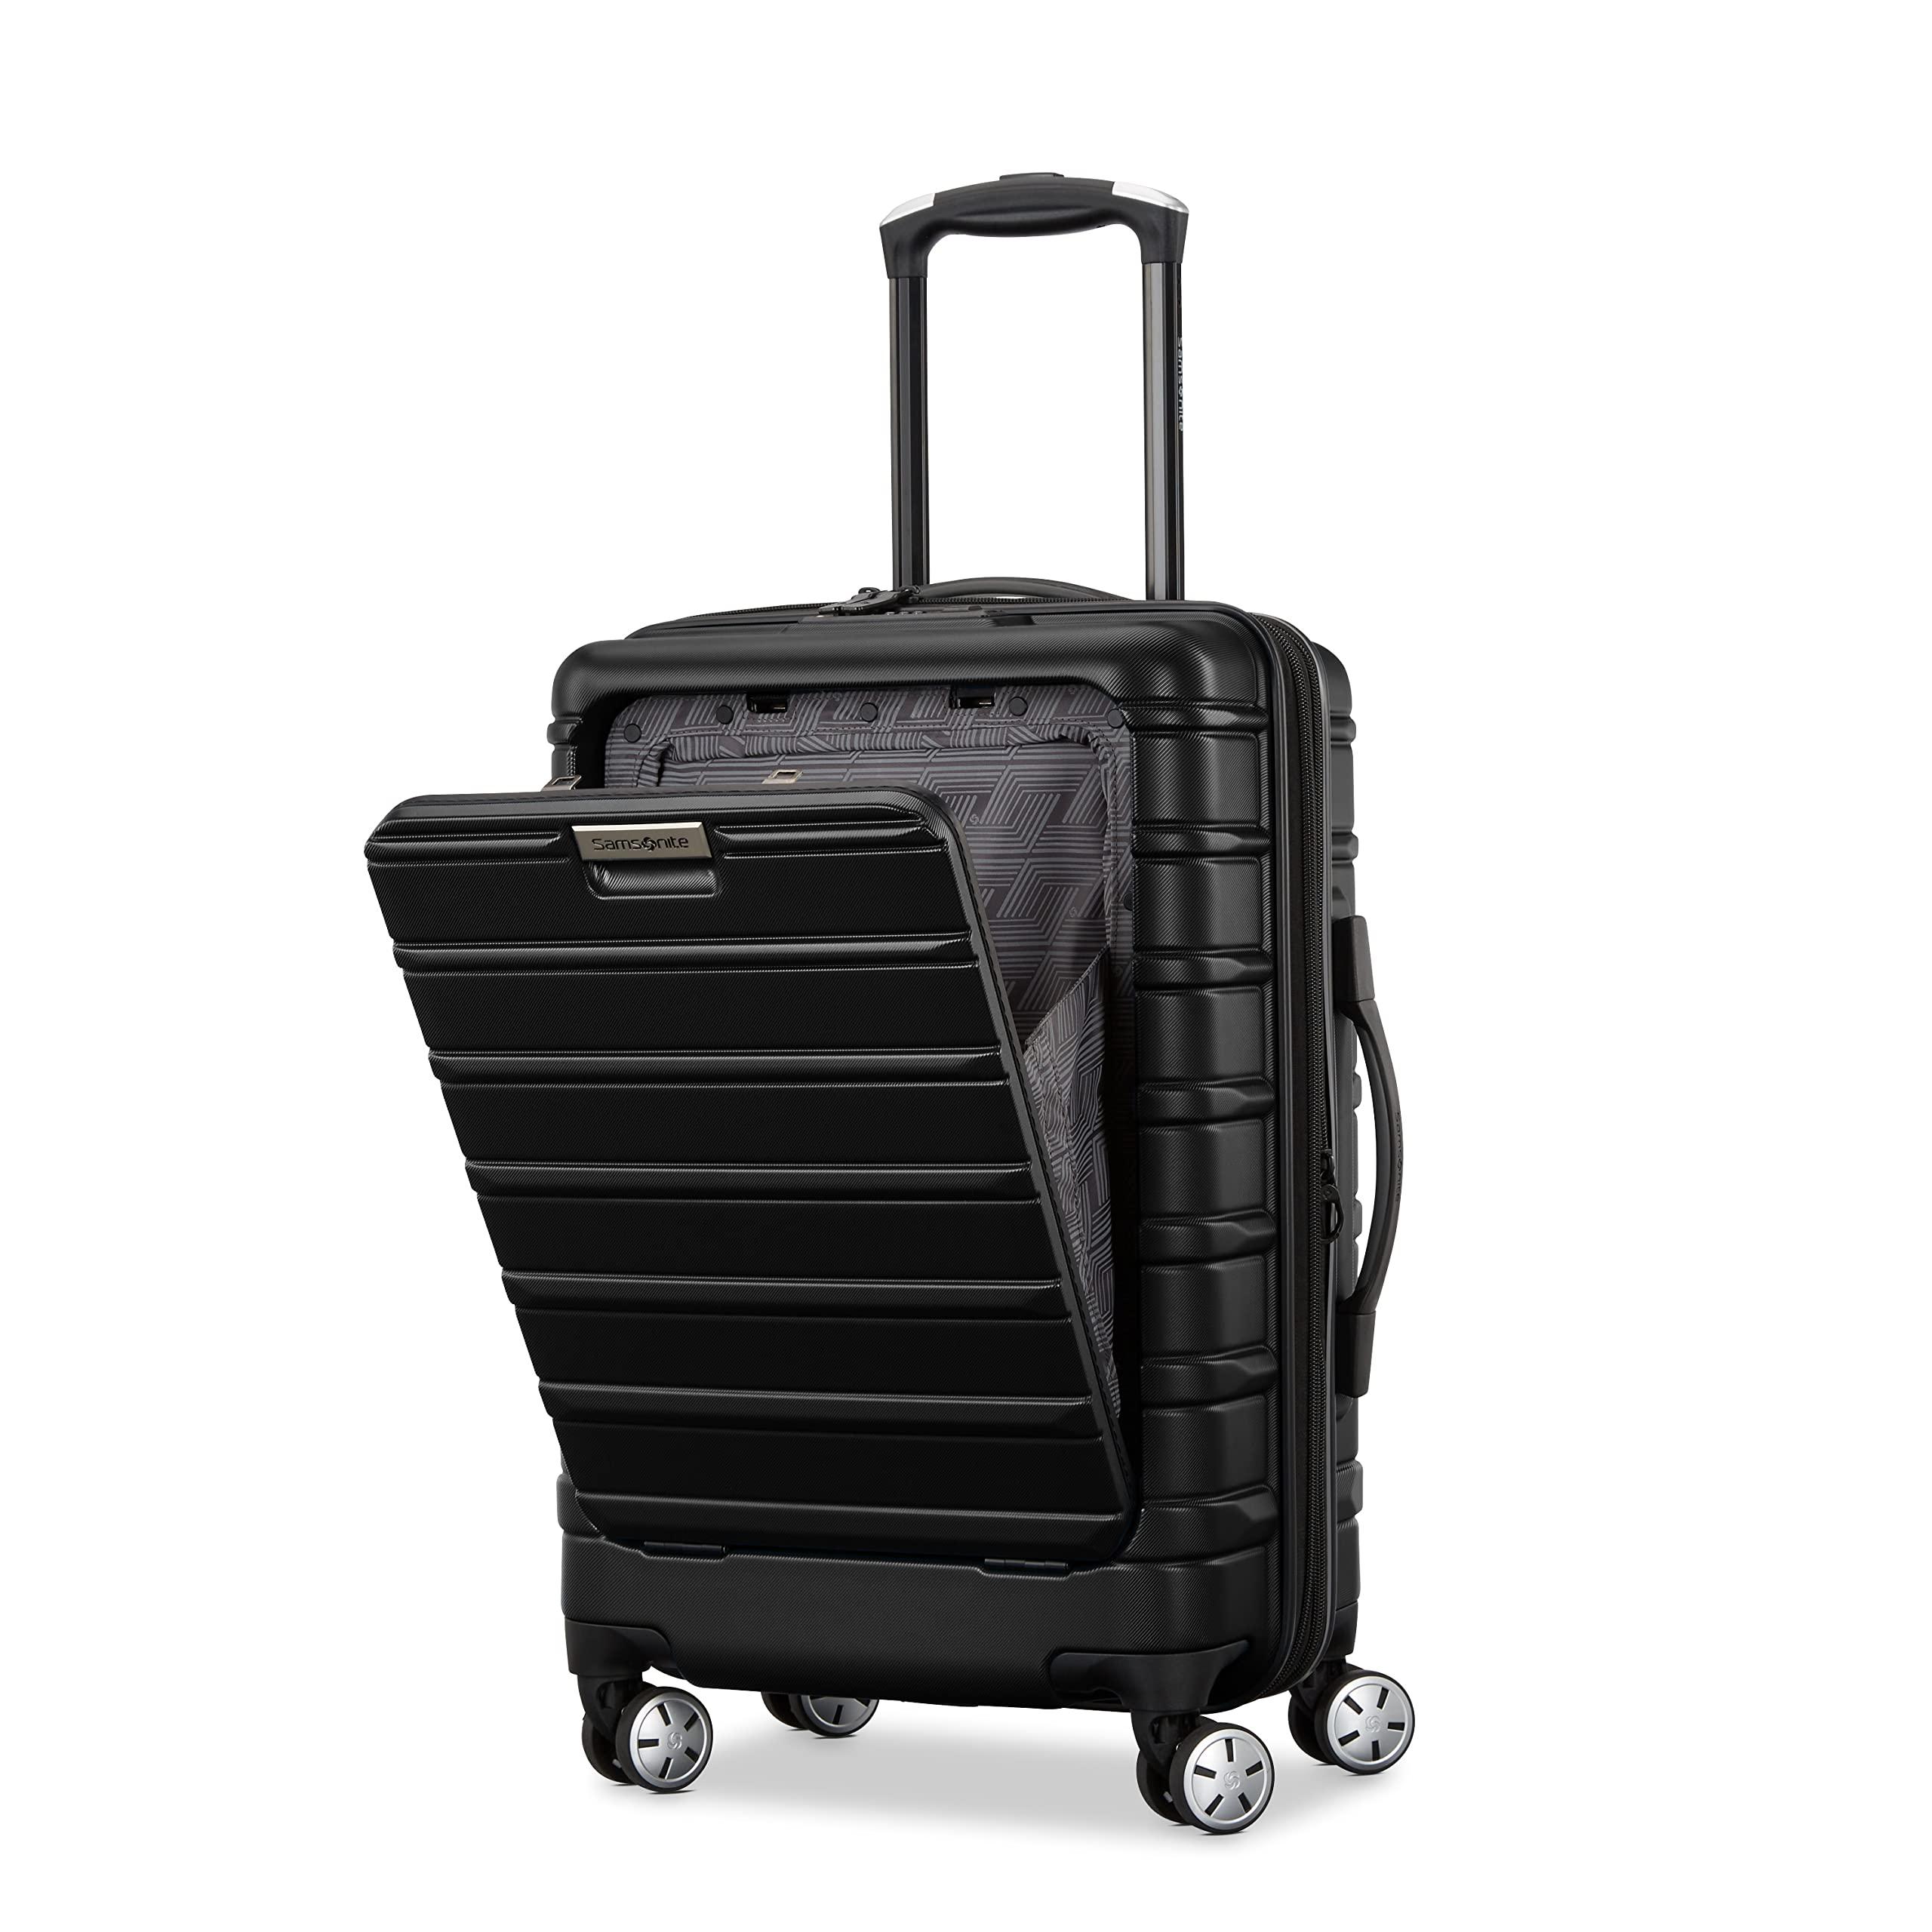 Samsonite Omni 2 Hardside Expandable Luggage With Spinner Wheels in Black |  Lyst